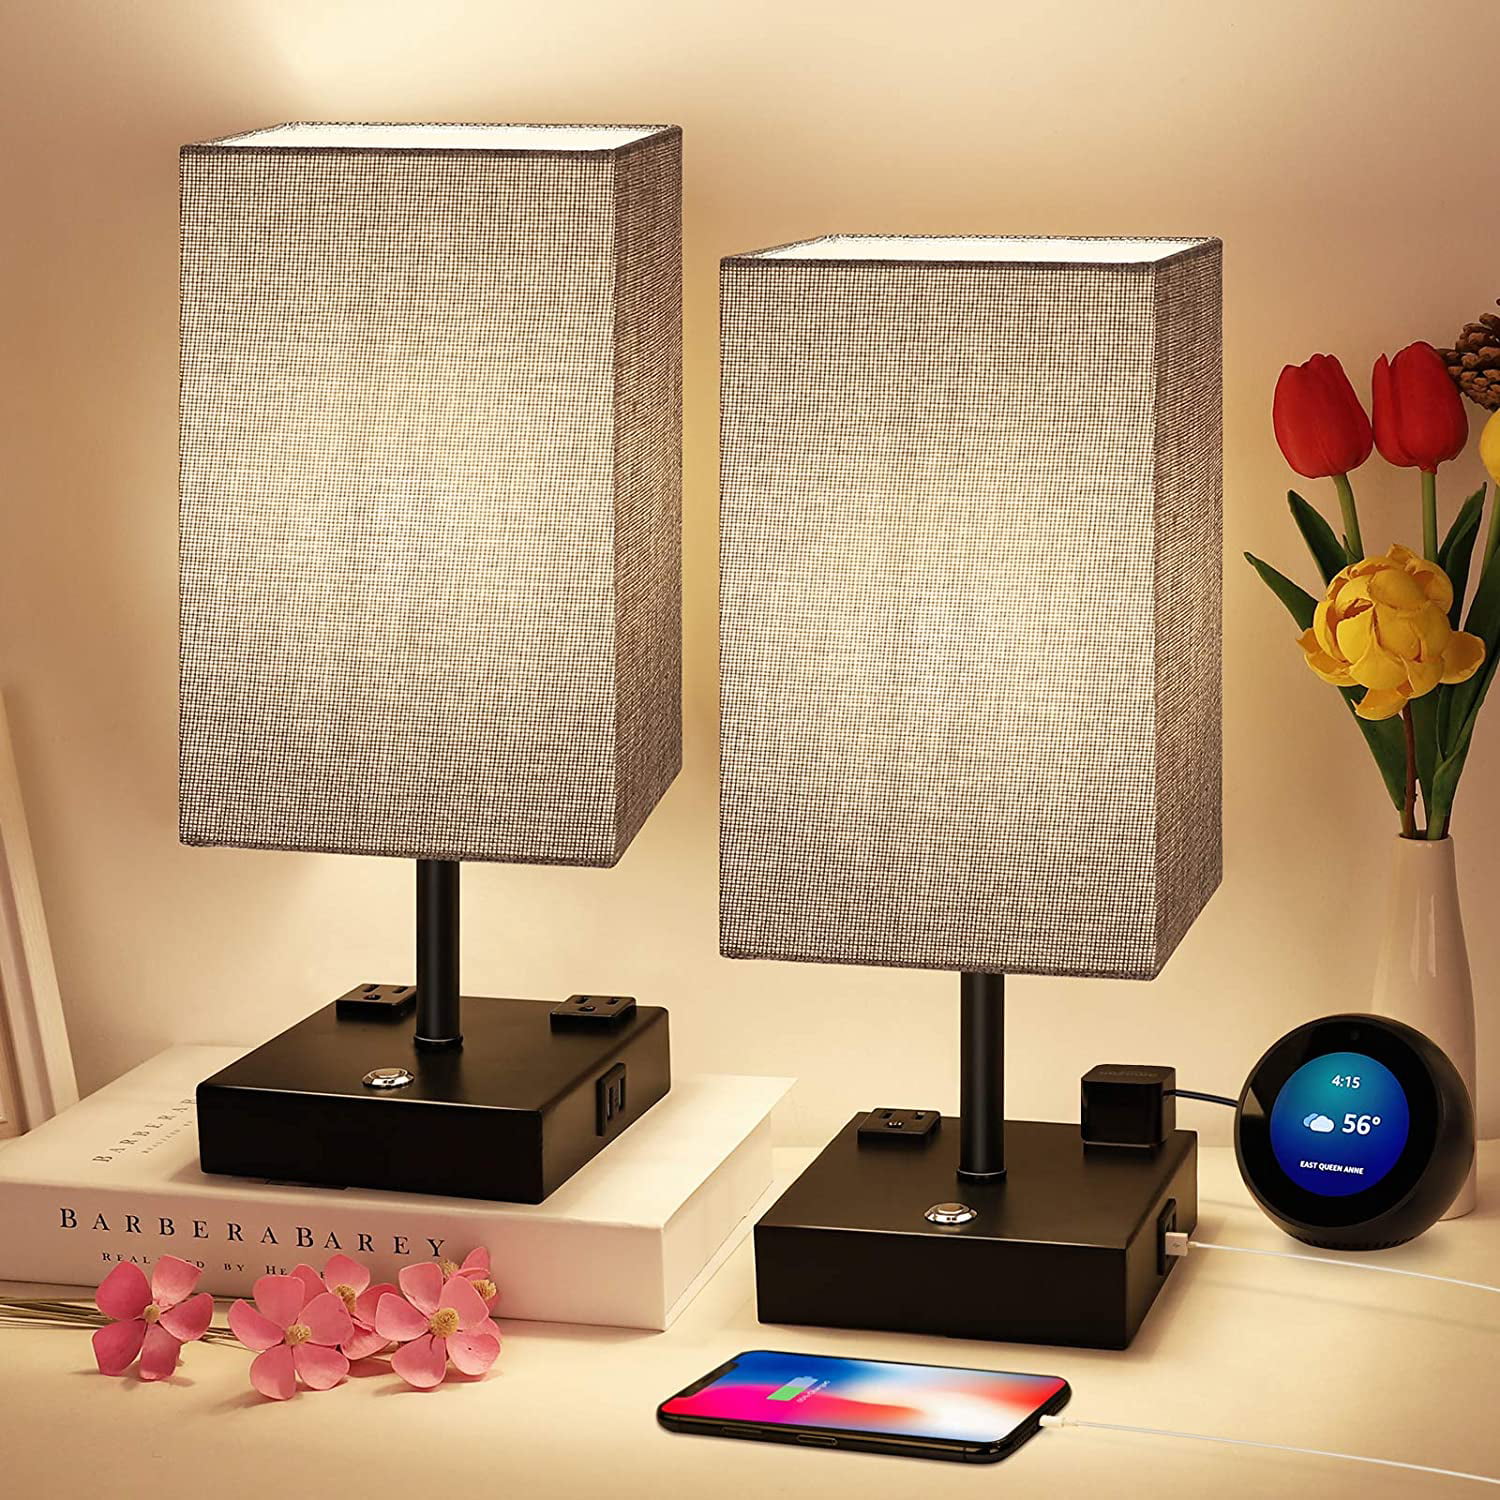 Touch Control Portable LED Smart Bedside Table Lamp USB Chargable Dimmable 